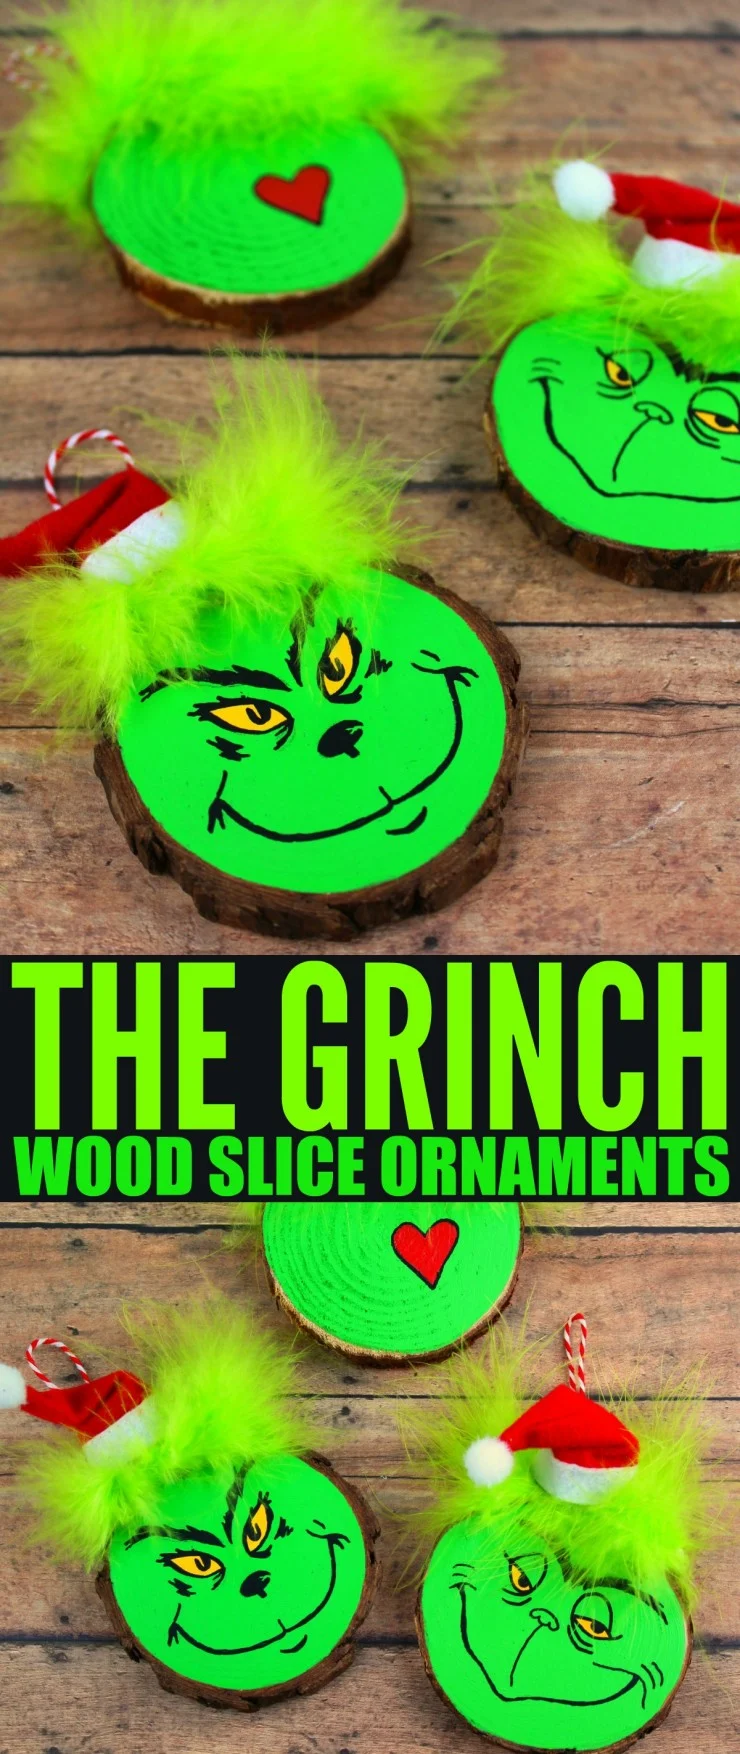 These Wood Slice Grinch Ornaments are a fun and festive holiday craft that make for great gifts and look great on a Christmas tree. We had so much fun making these Grinch inspired Christmas ornaments! 